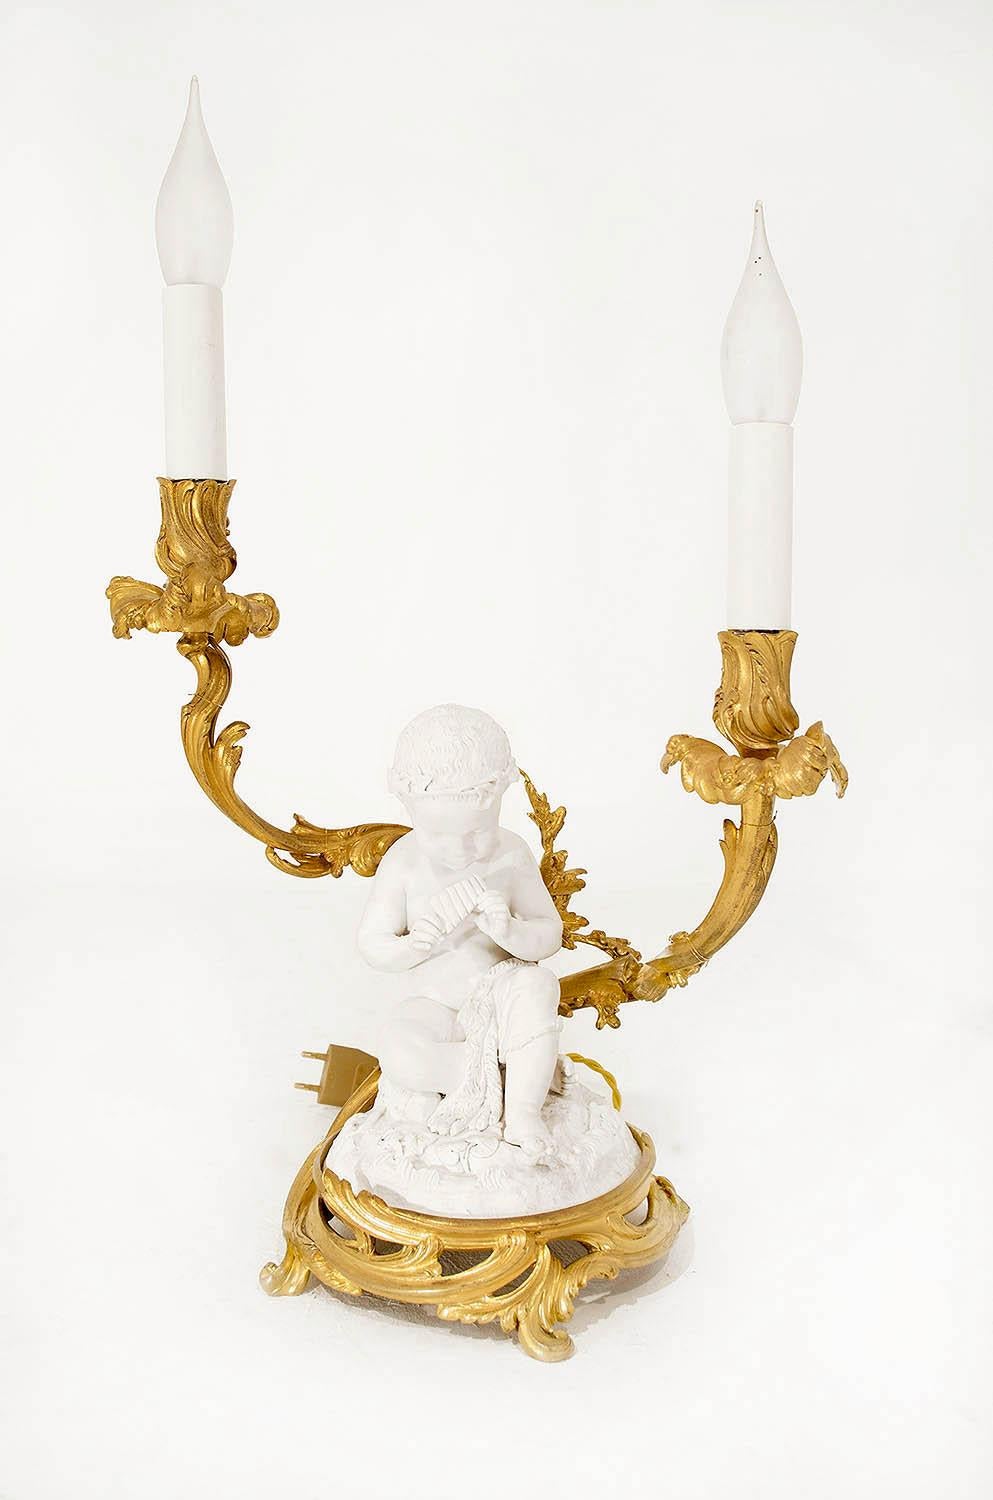 Pair of Louis XV style candelabra in Sèvres porcelain biscuit and gilt bronze, figuring two putti musicians.
Mounted on a rocaille gilt bronze circular base with two candle branches with acanthus leaves decor. The seated children are dressed with